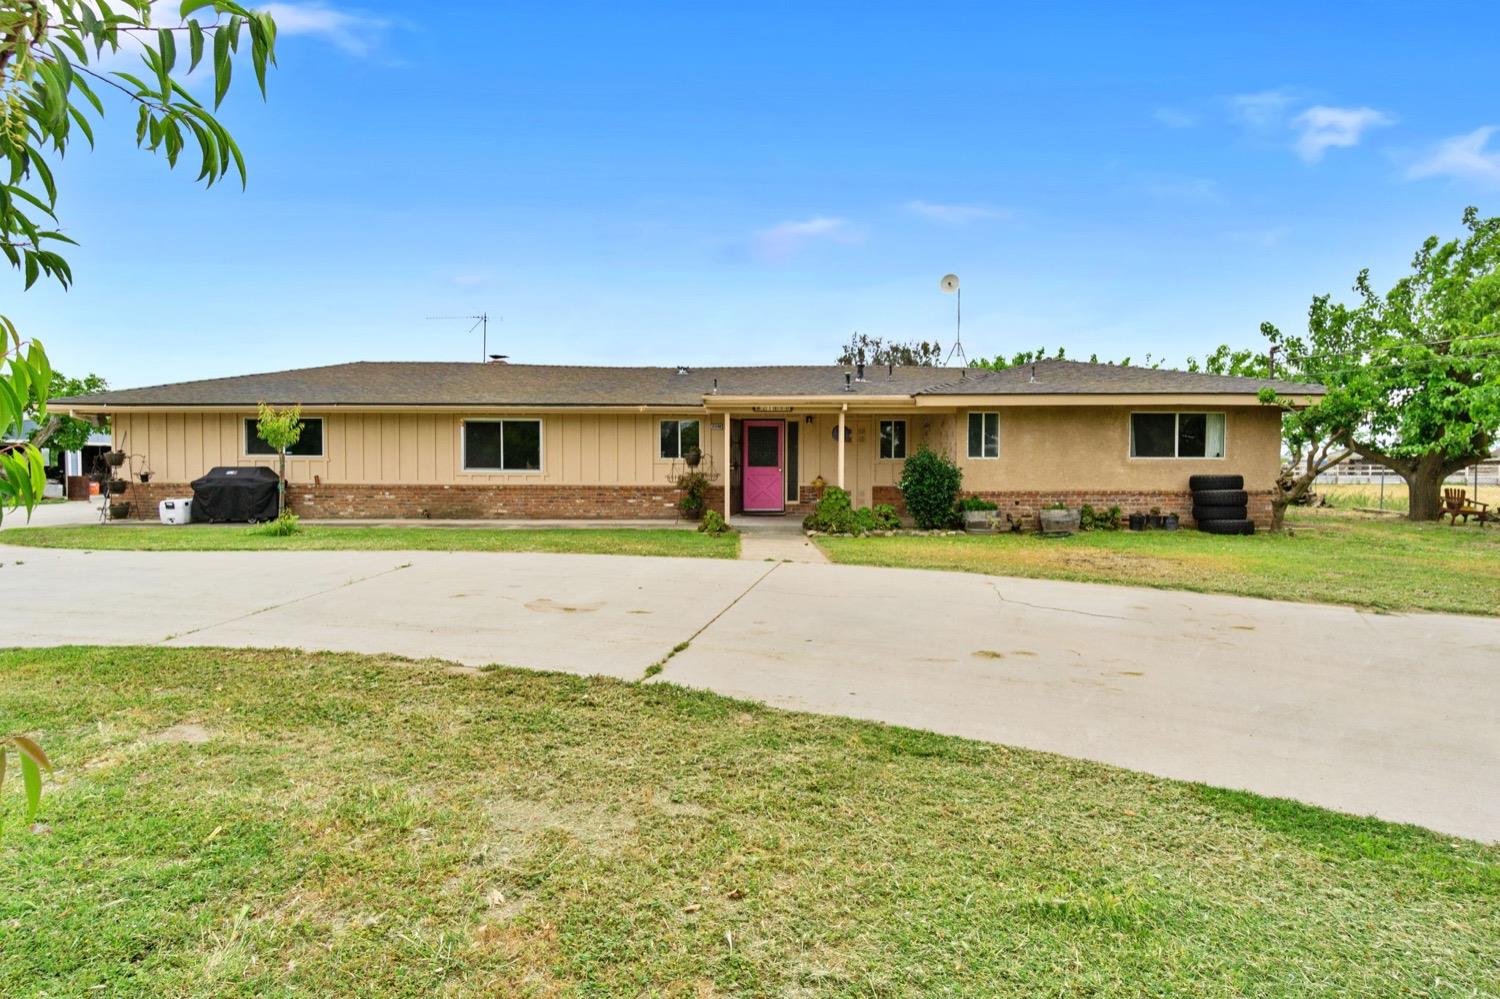 Photo of 21150 Ave 10 in Madera, CA